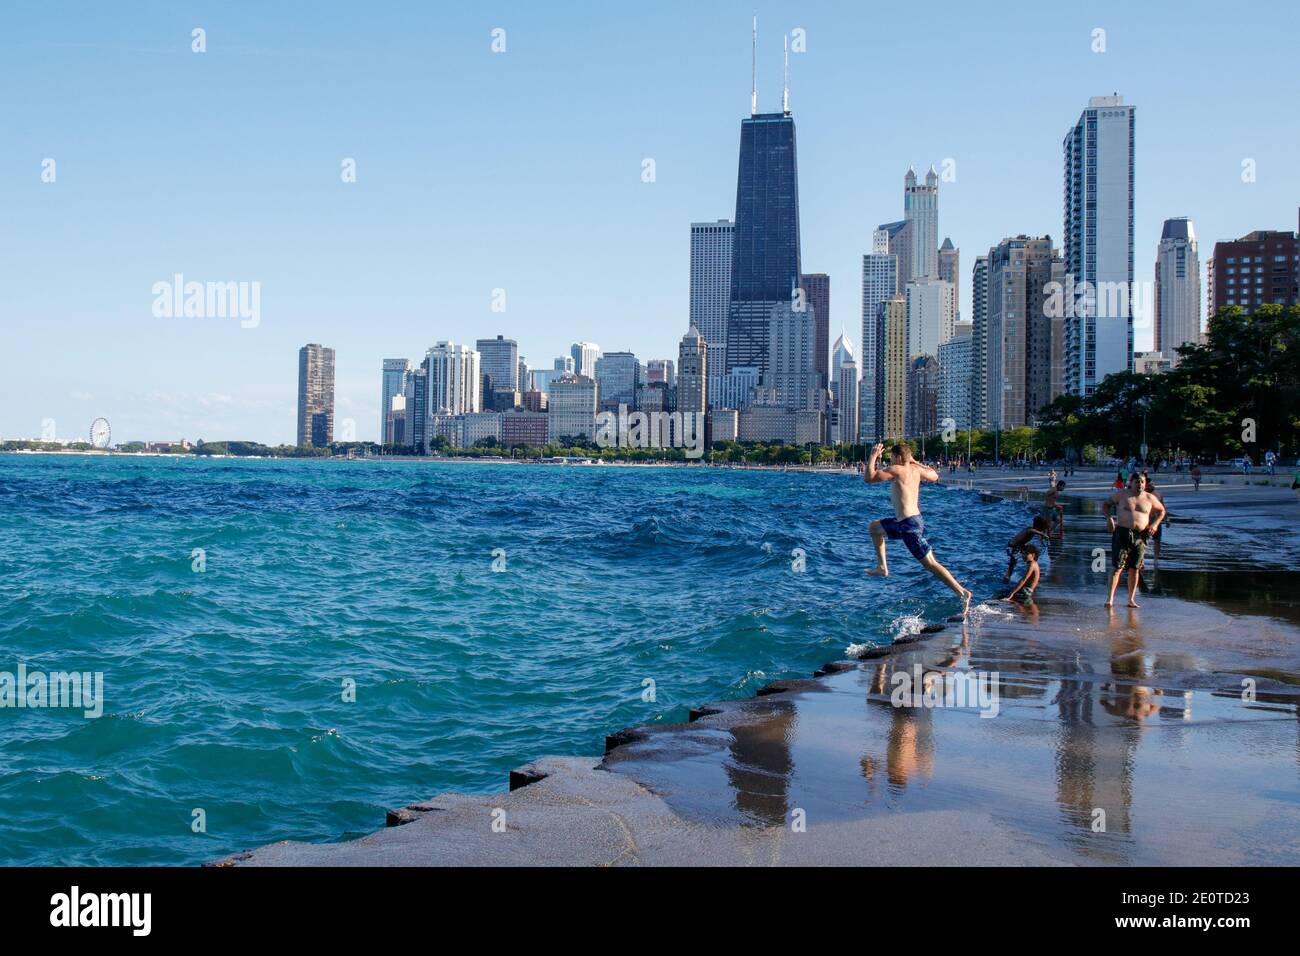 Chicago lakefront near North Avenue Beach. Young man jumping from seawall into lake. Stock Photo